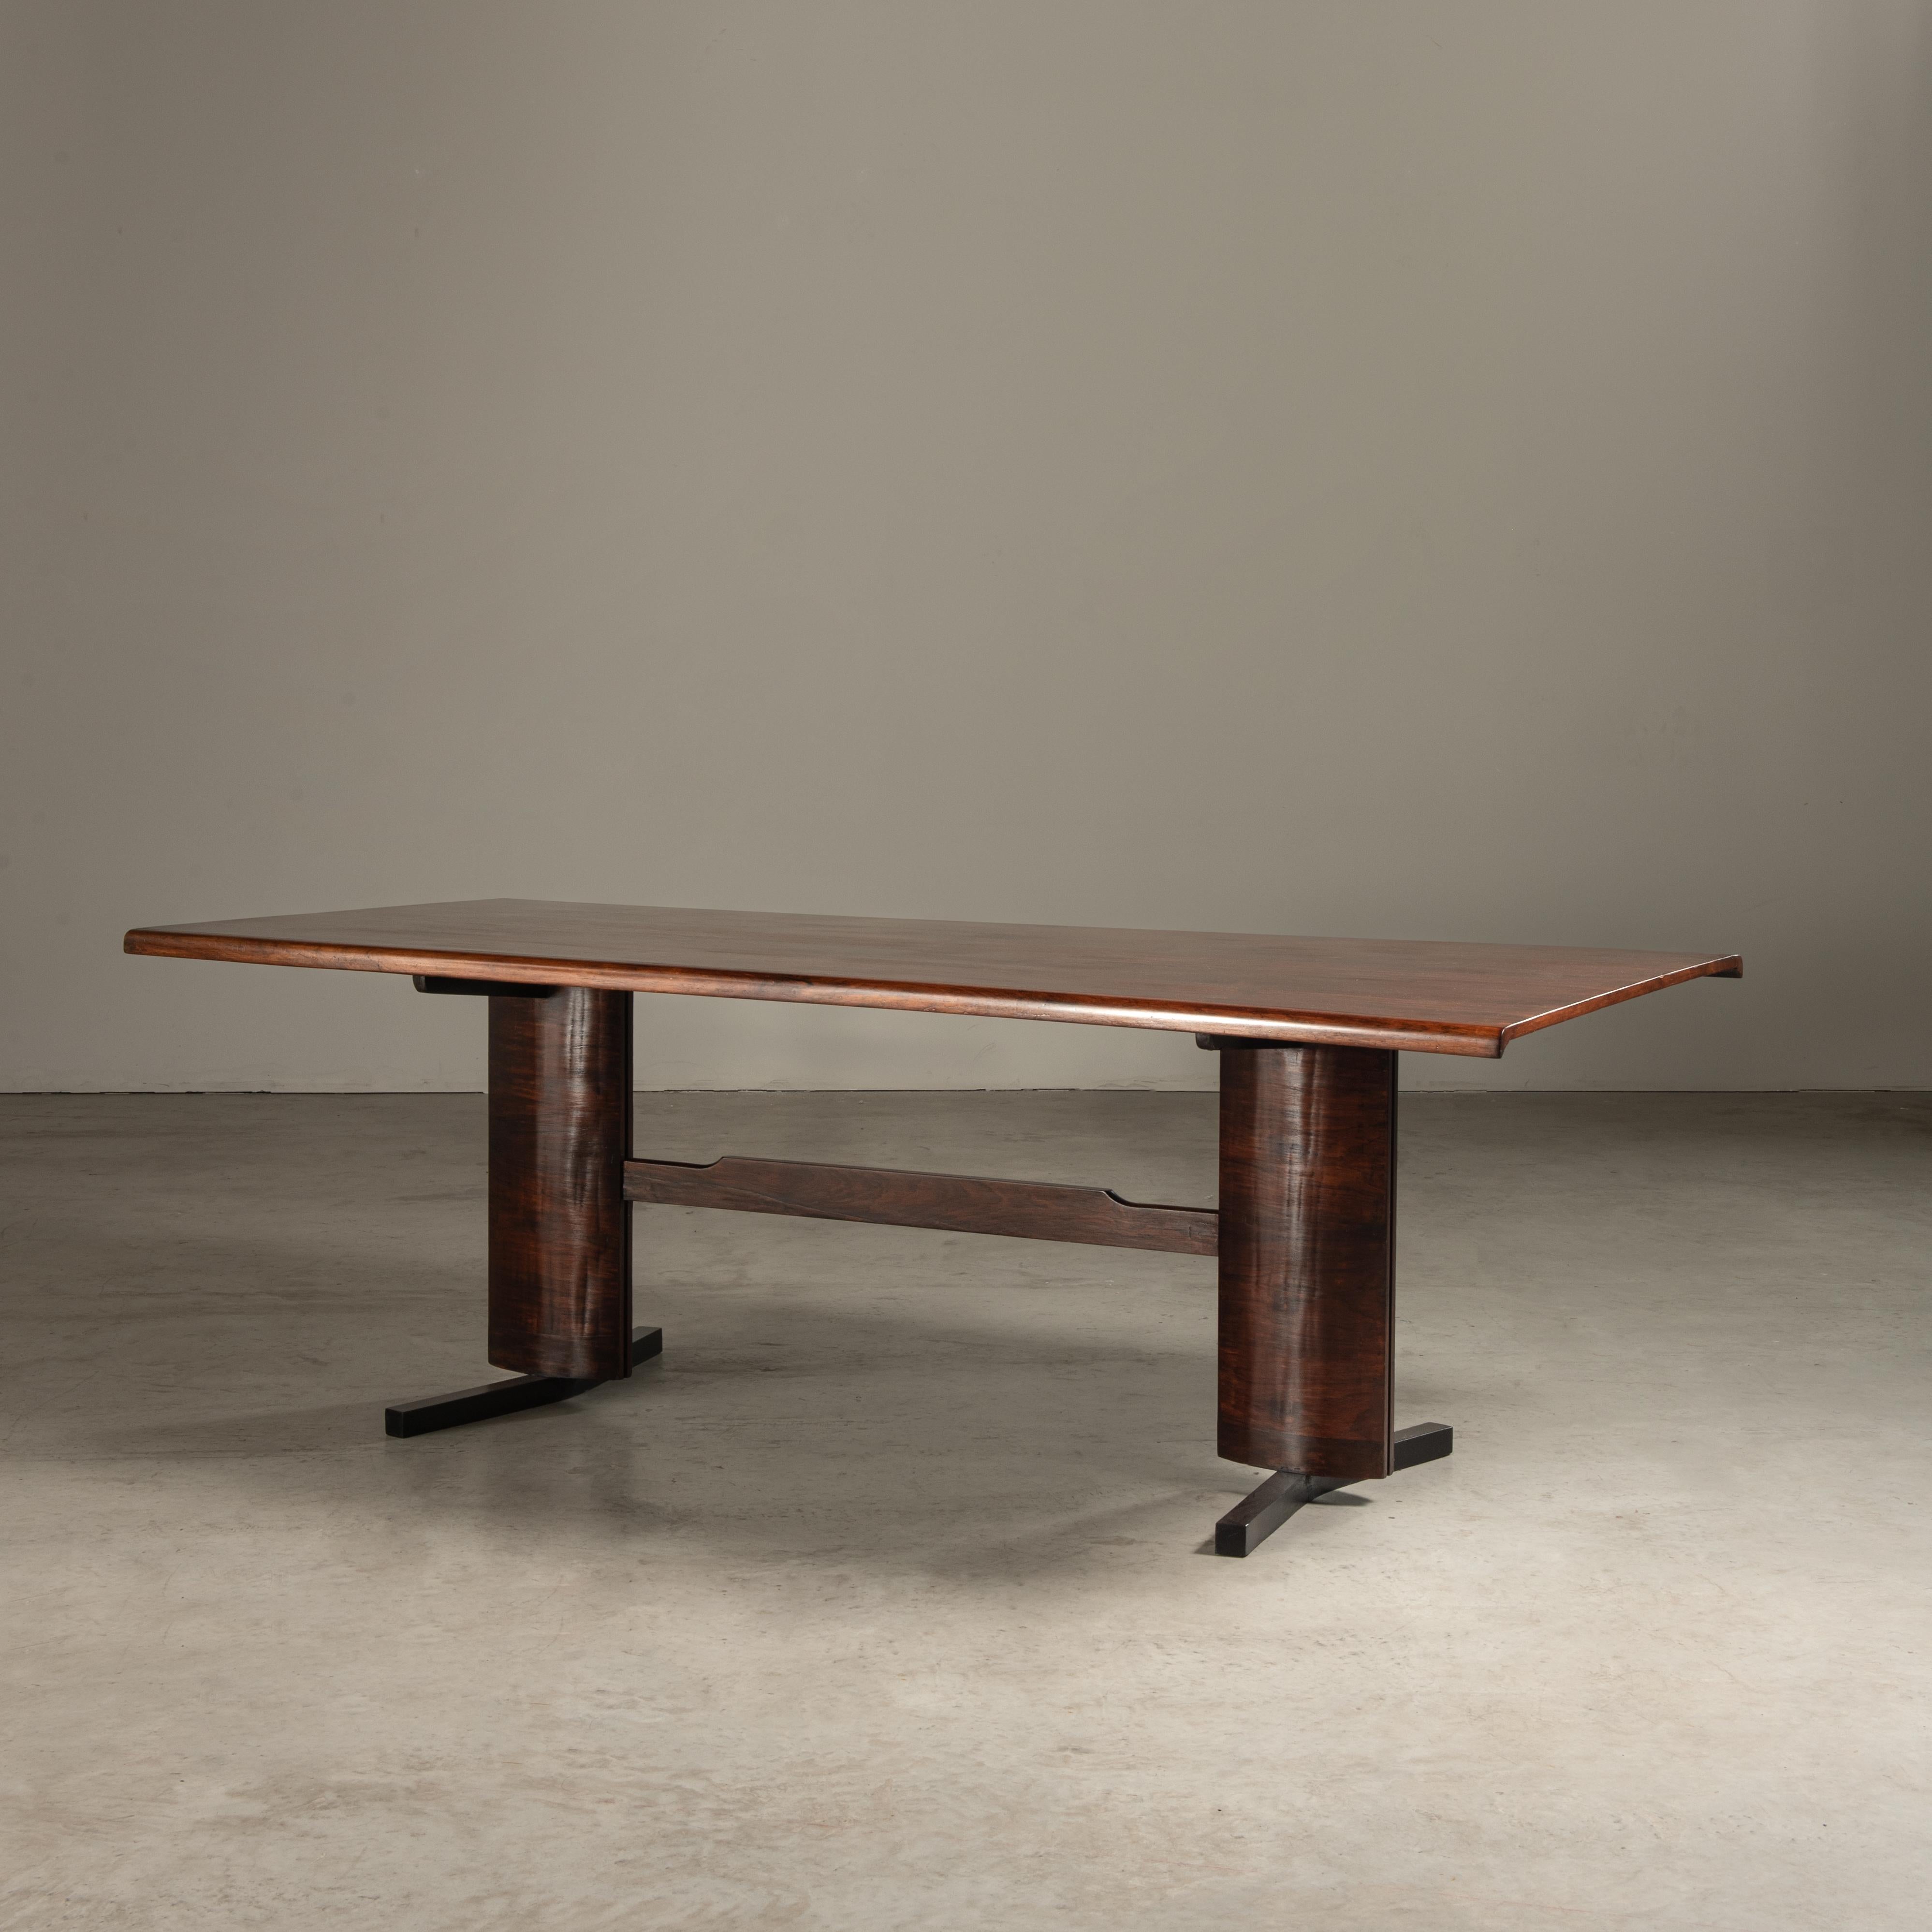 This dining table is a fine example of mid-20th century Brazilian furniture, manufactured by Novo Rumo. Novo Rumo was known for its modernist approach to design, often utilizing native Brazilian woods and materials to create pieces that were both